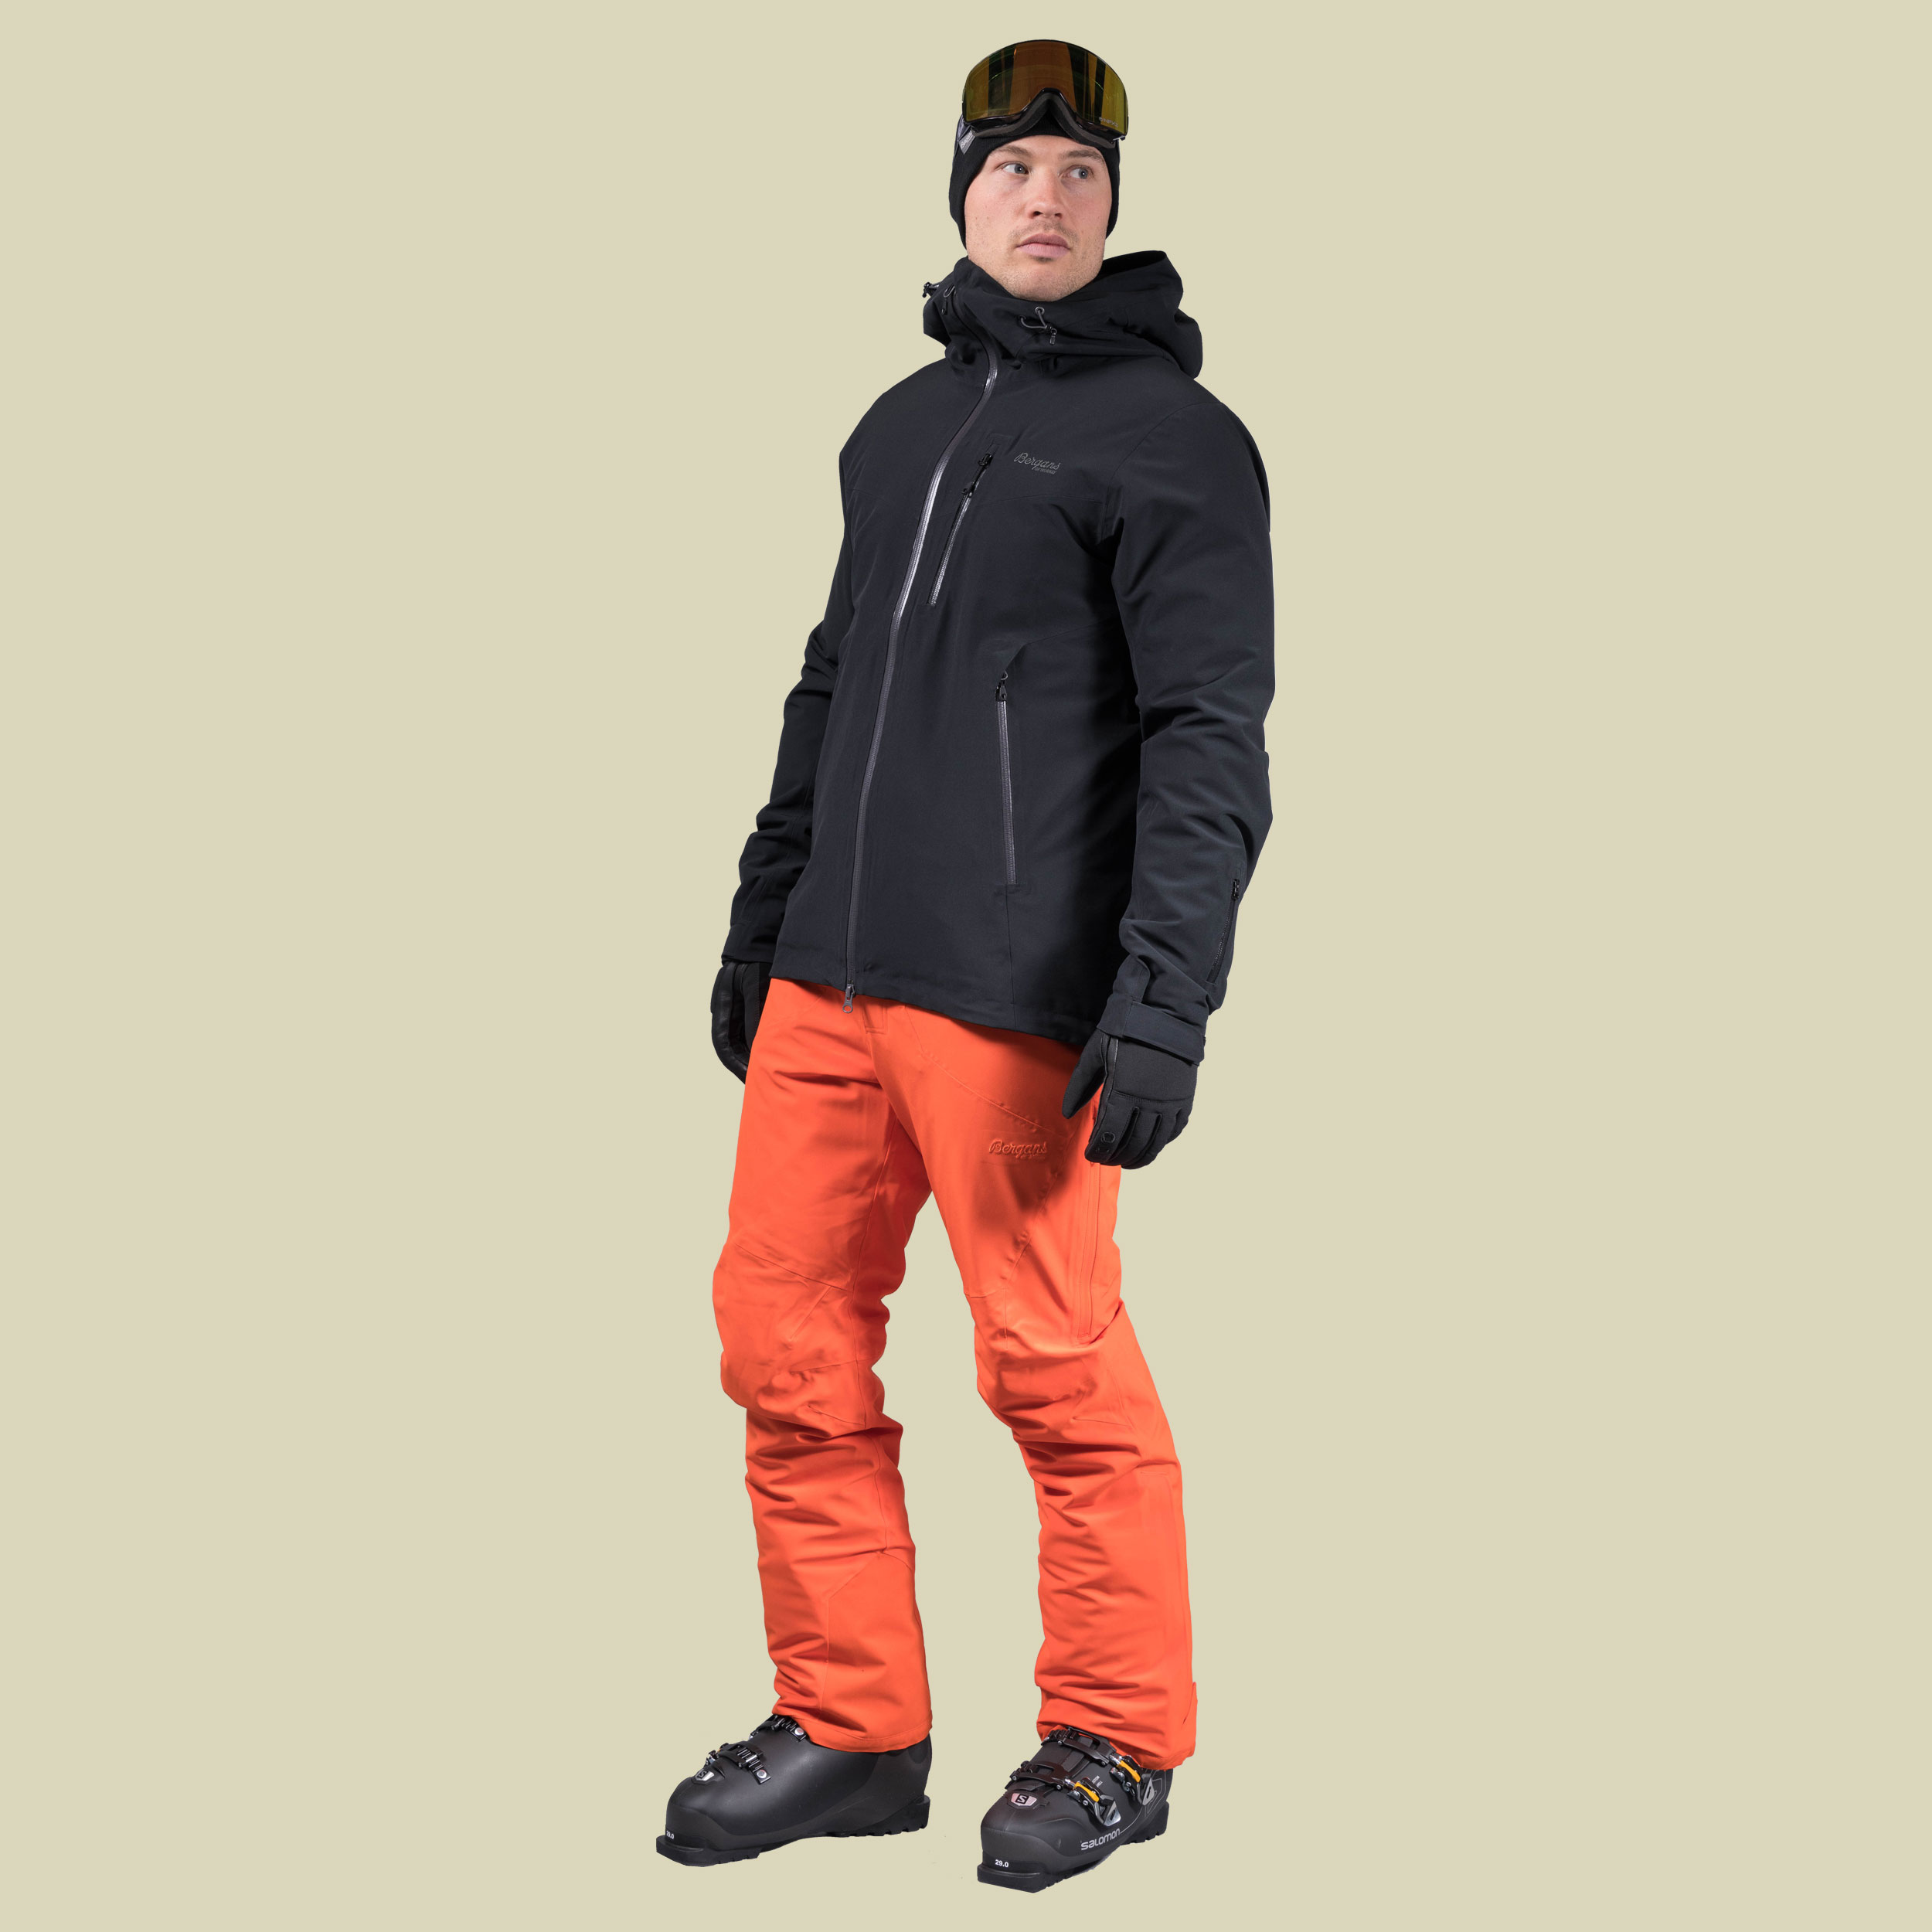 Oppdal Insulated Jacket Men Größe L  Farbe black/solid charcoal